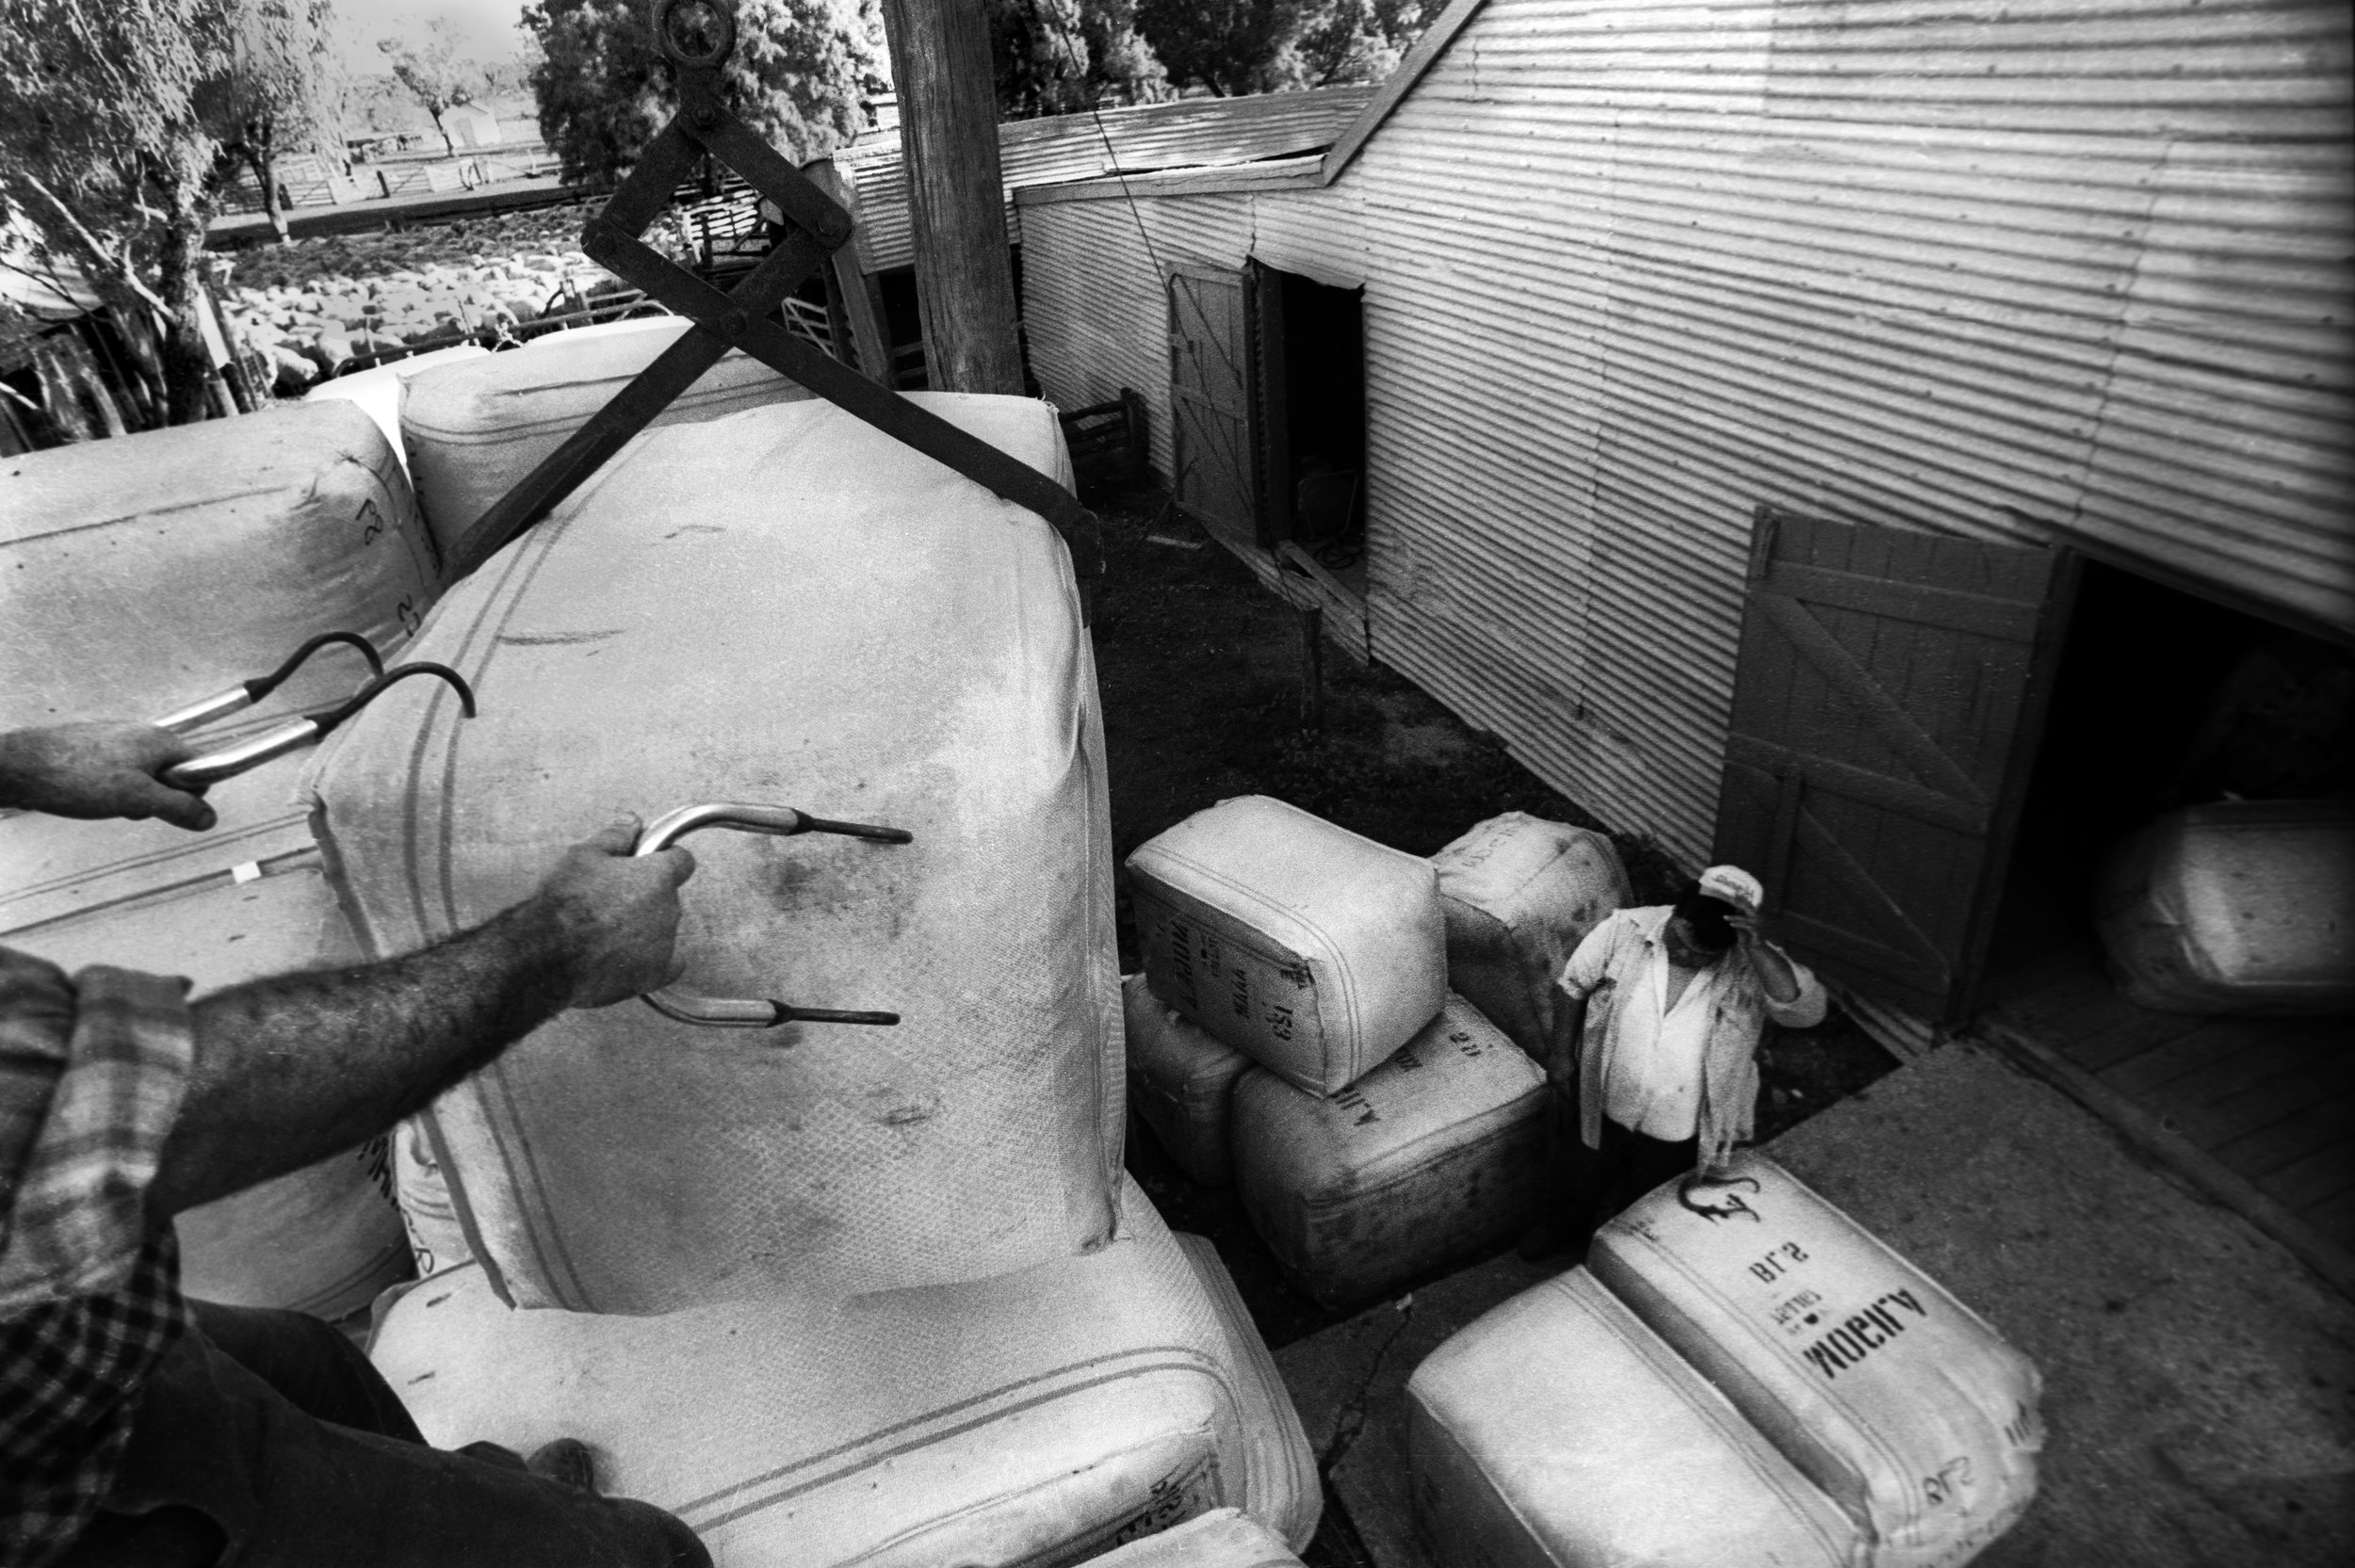  Bales of wool loaded upon a truck for initial transportation to wool storage facilities. Outback NSW, Australia. 1996   